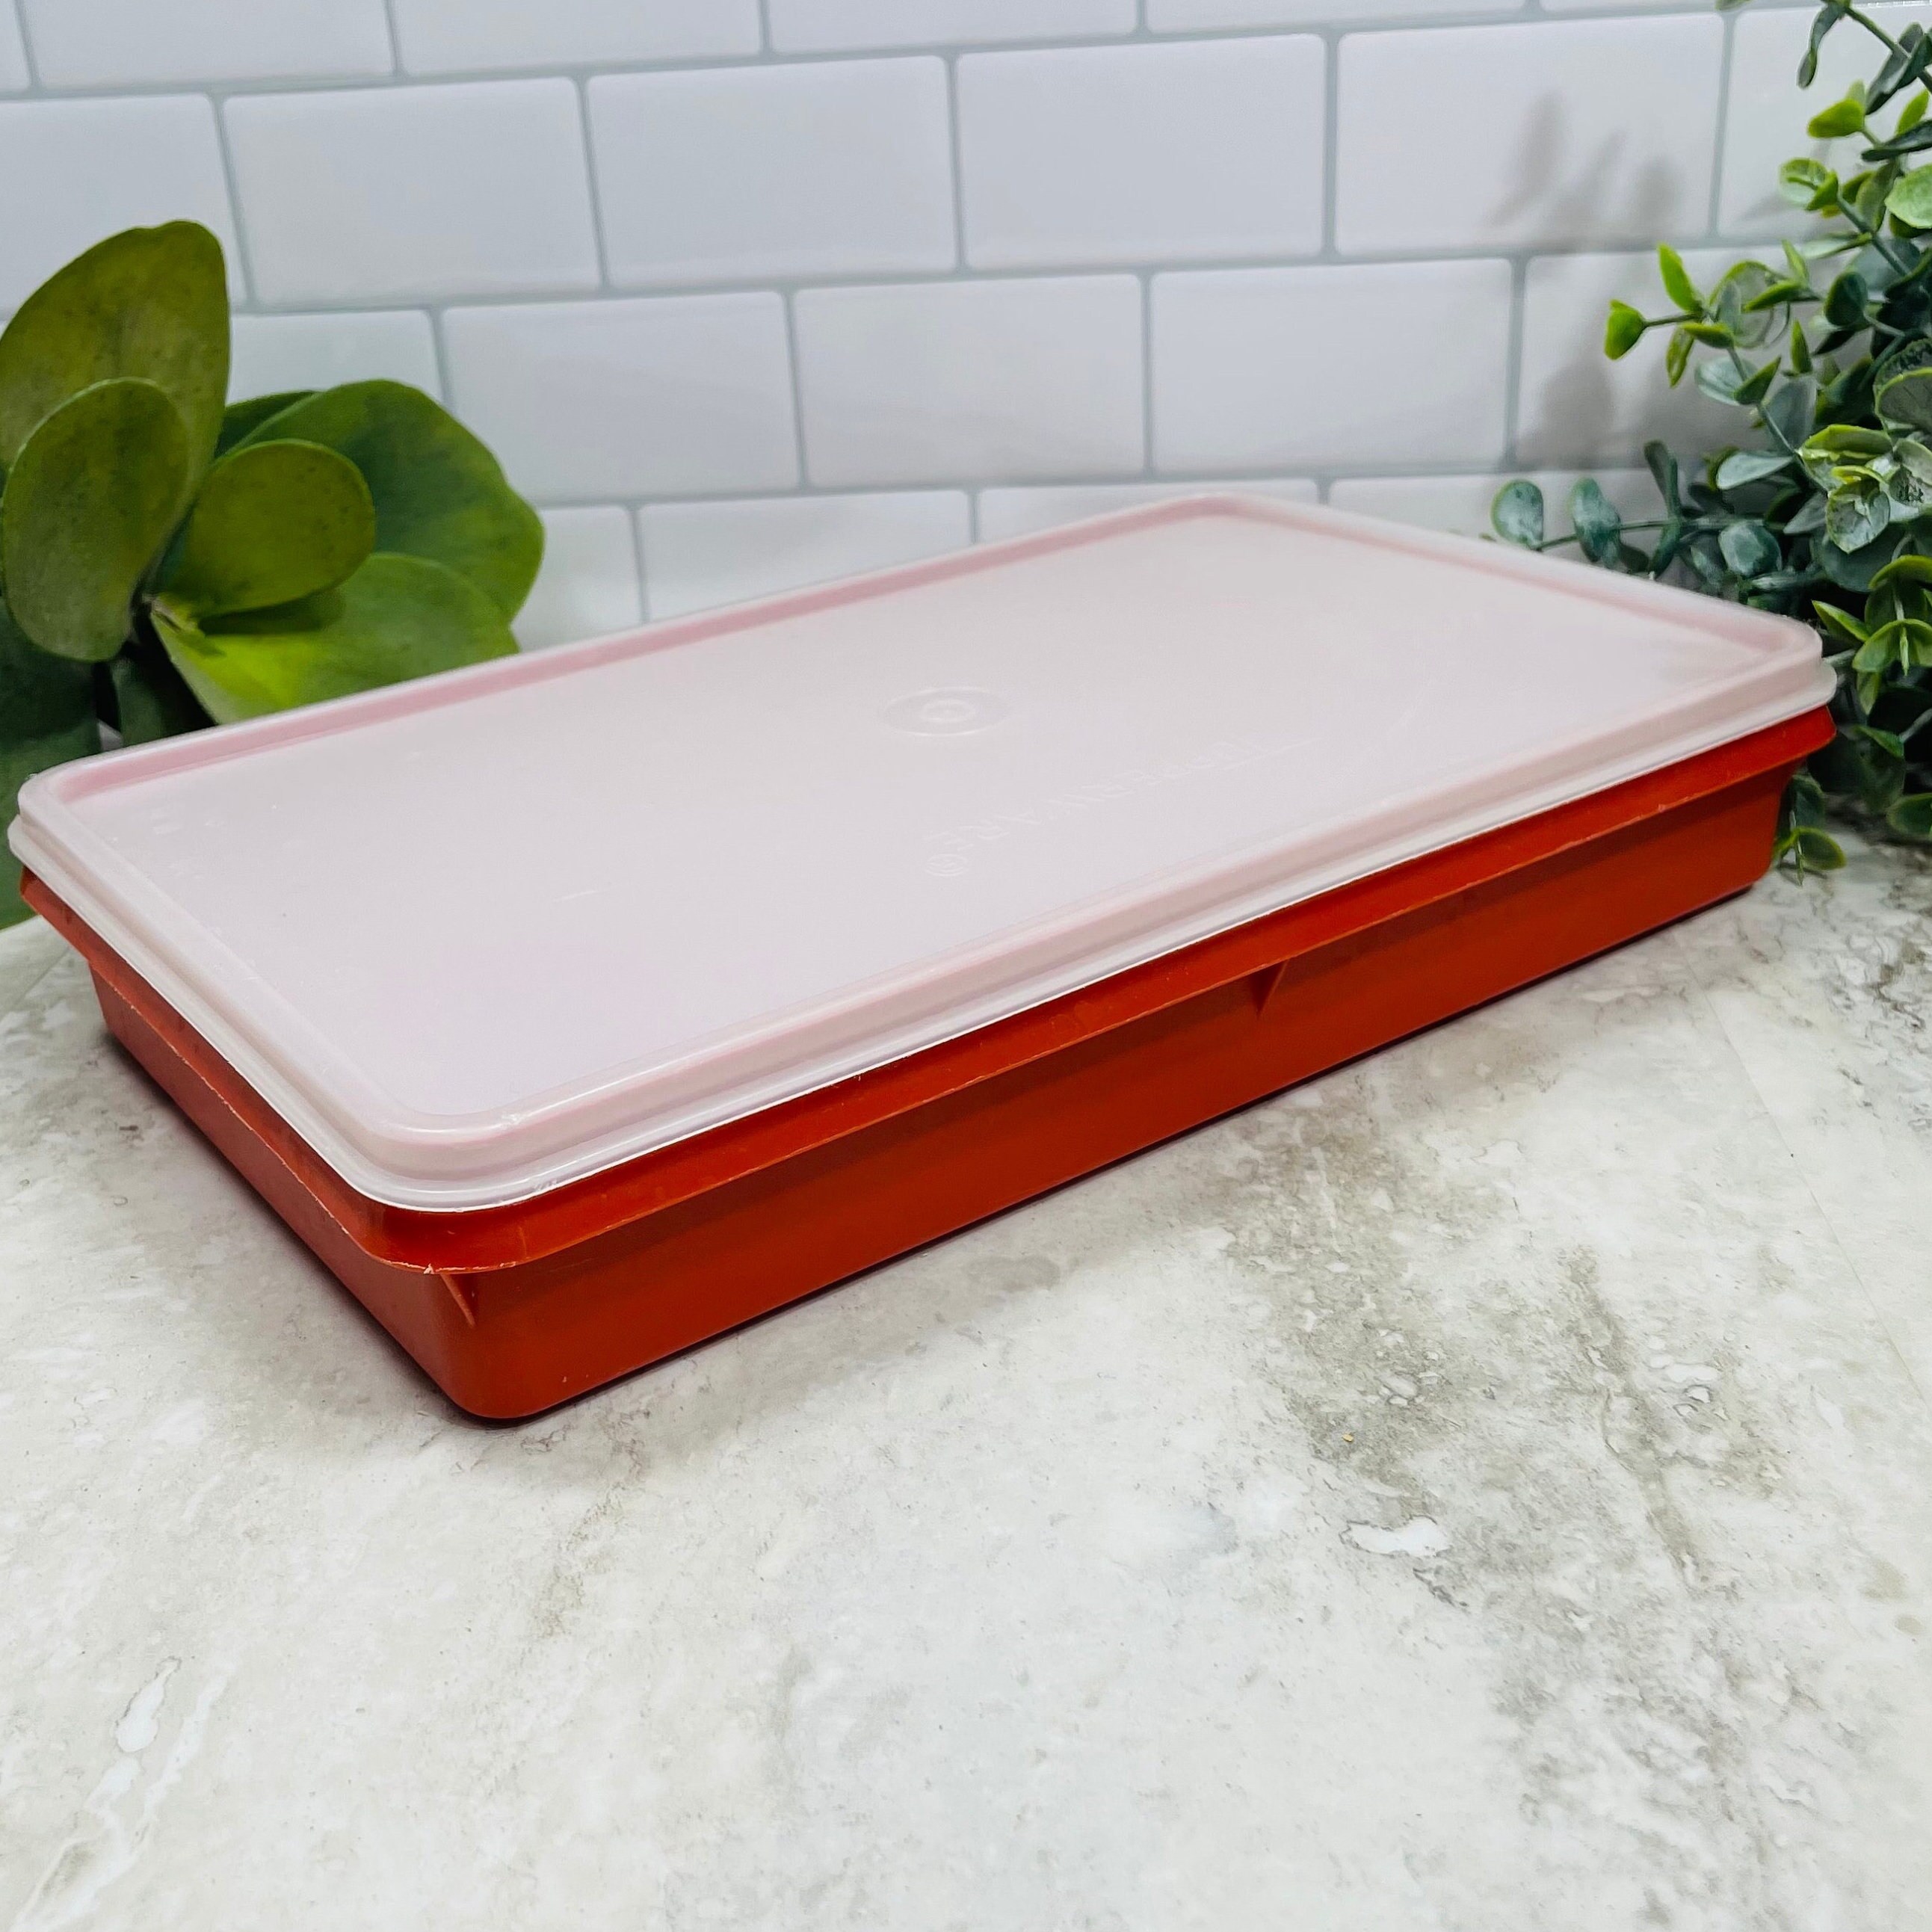 Vintage Tupperware Deli Keeper Container, Lid CHOICE Paprika, Mint Lid,  Sheer, 816 Deli Meat, Cold Cuts, Cheese, Kitchen, Craft Storage 